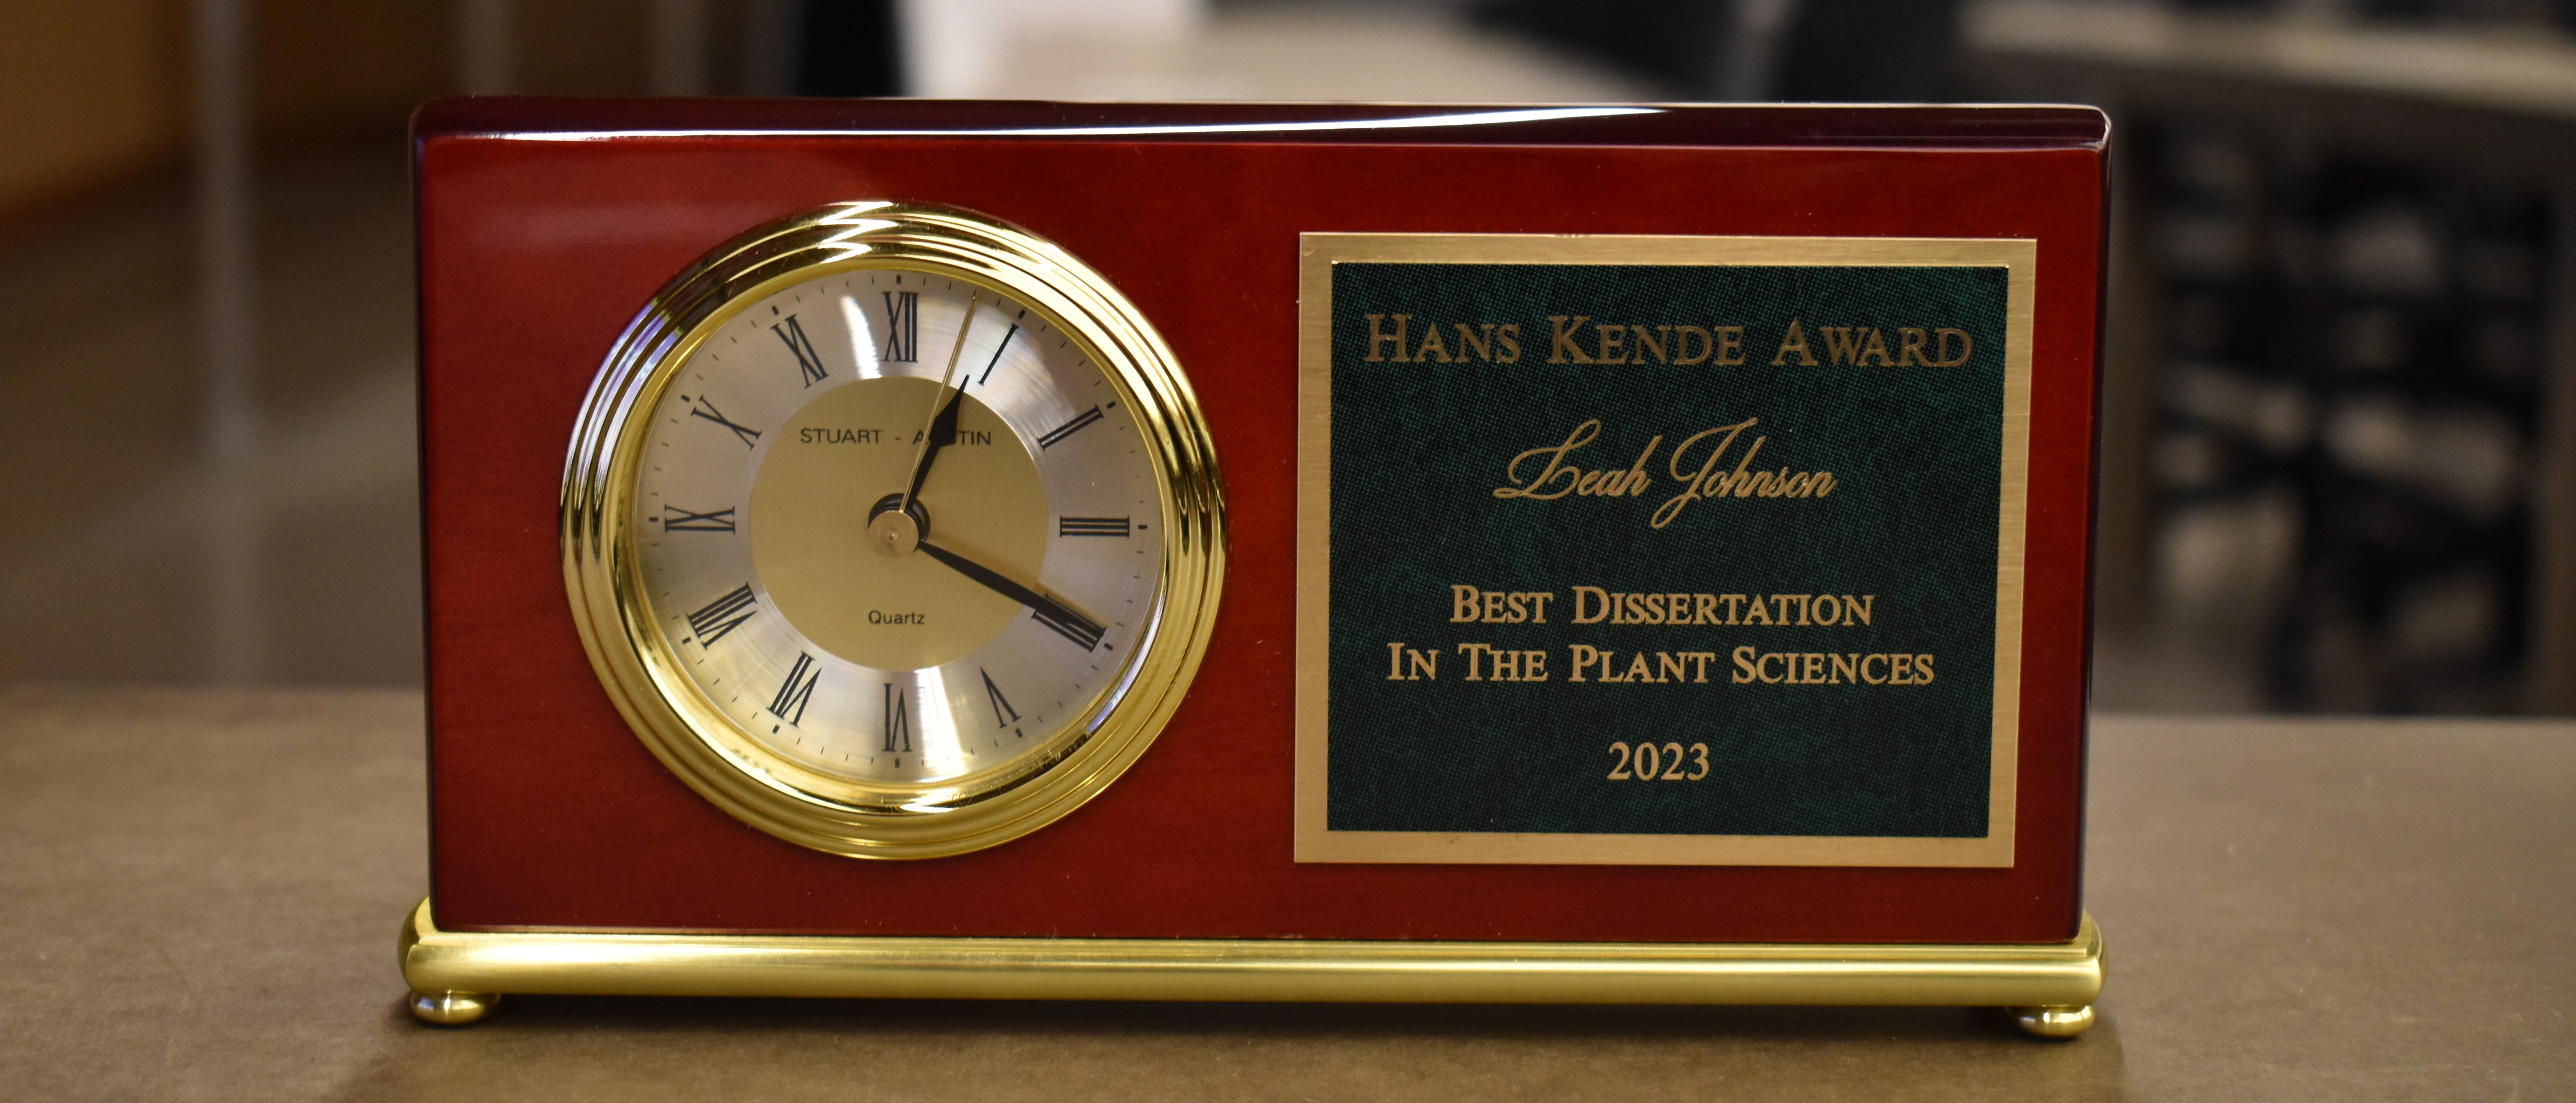 A clock with a plaque with text that reads: Hans Kende Award. Leah Johnson. Best Dissertation in the Plant Sciences 2023